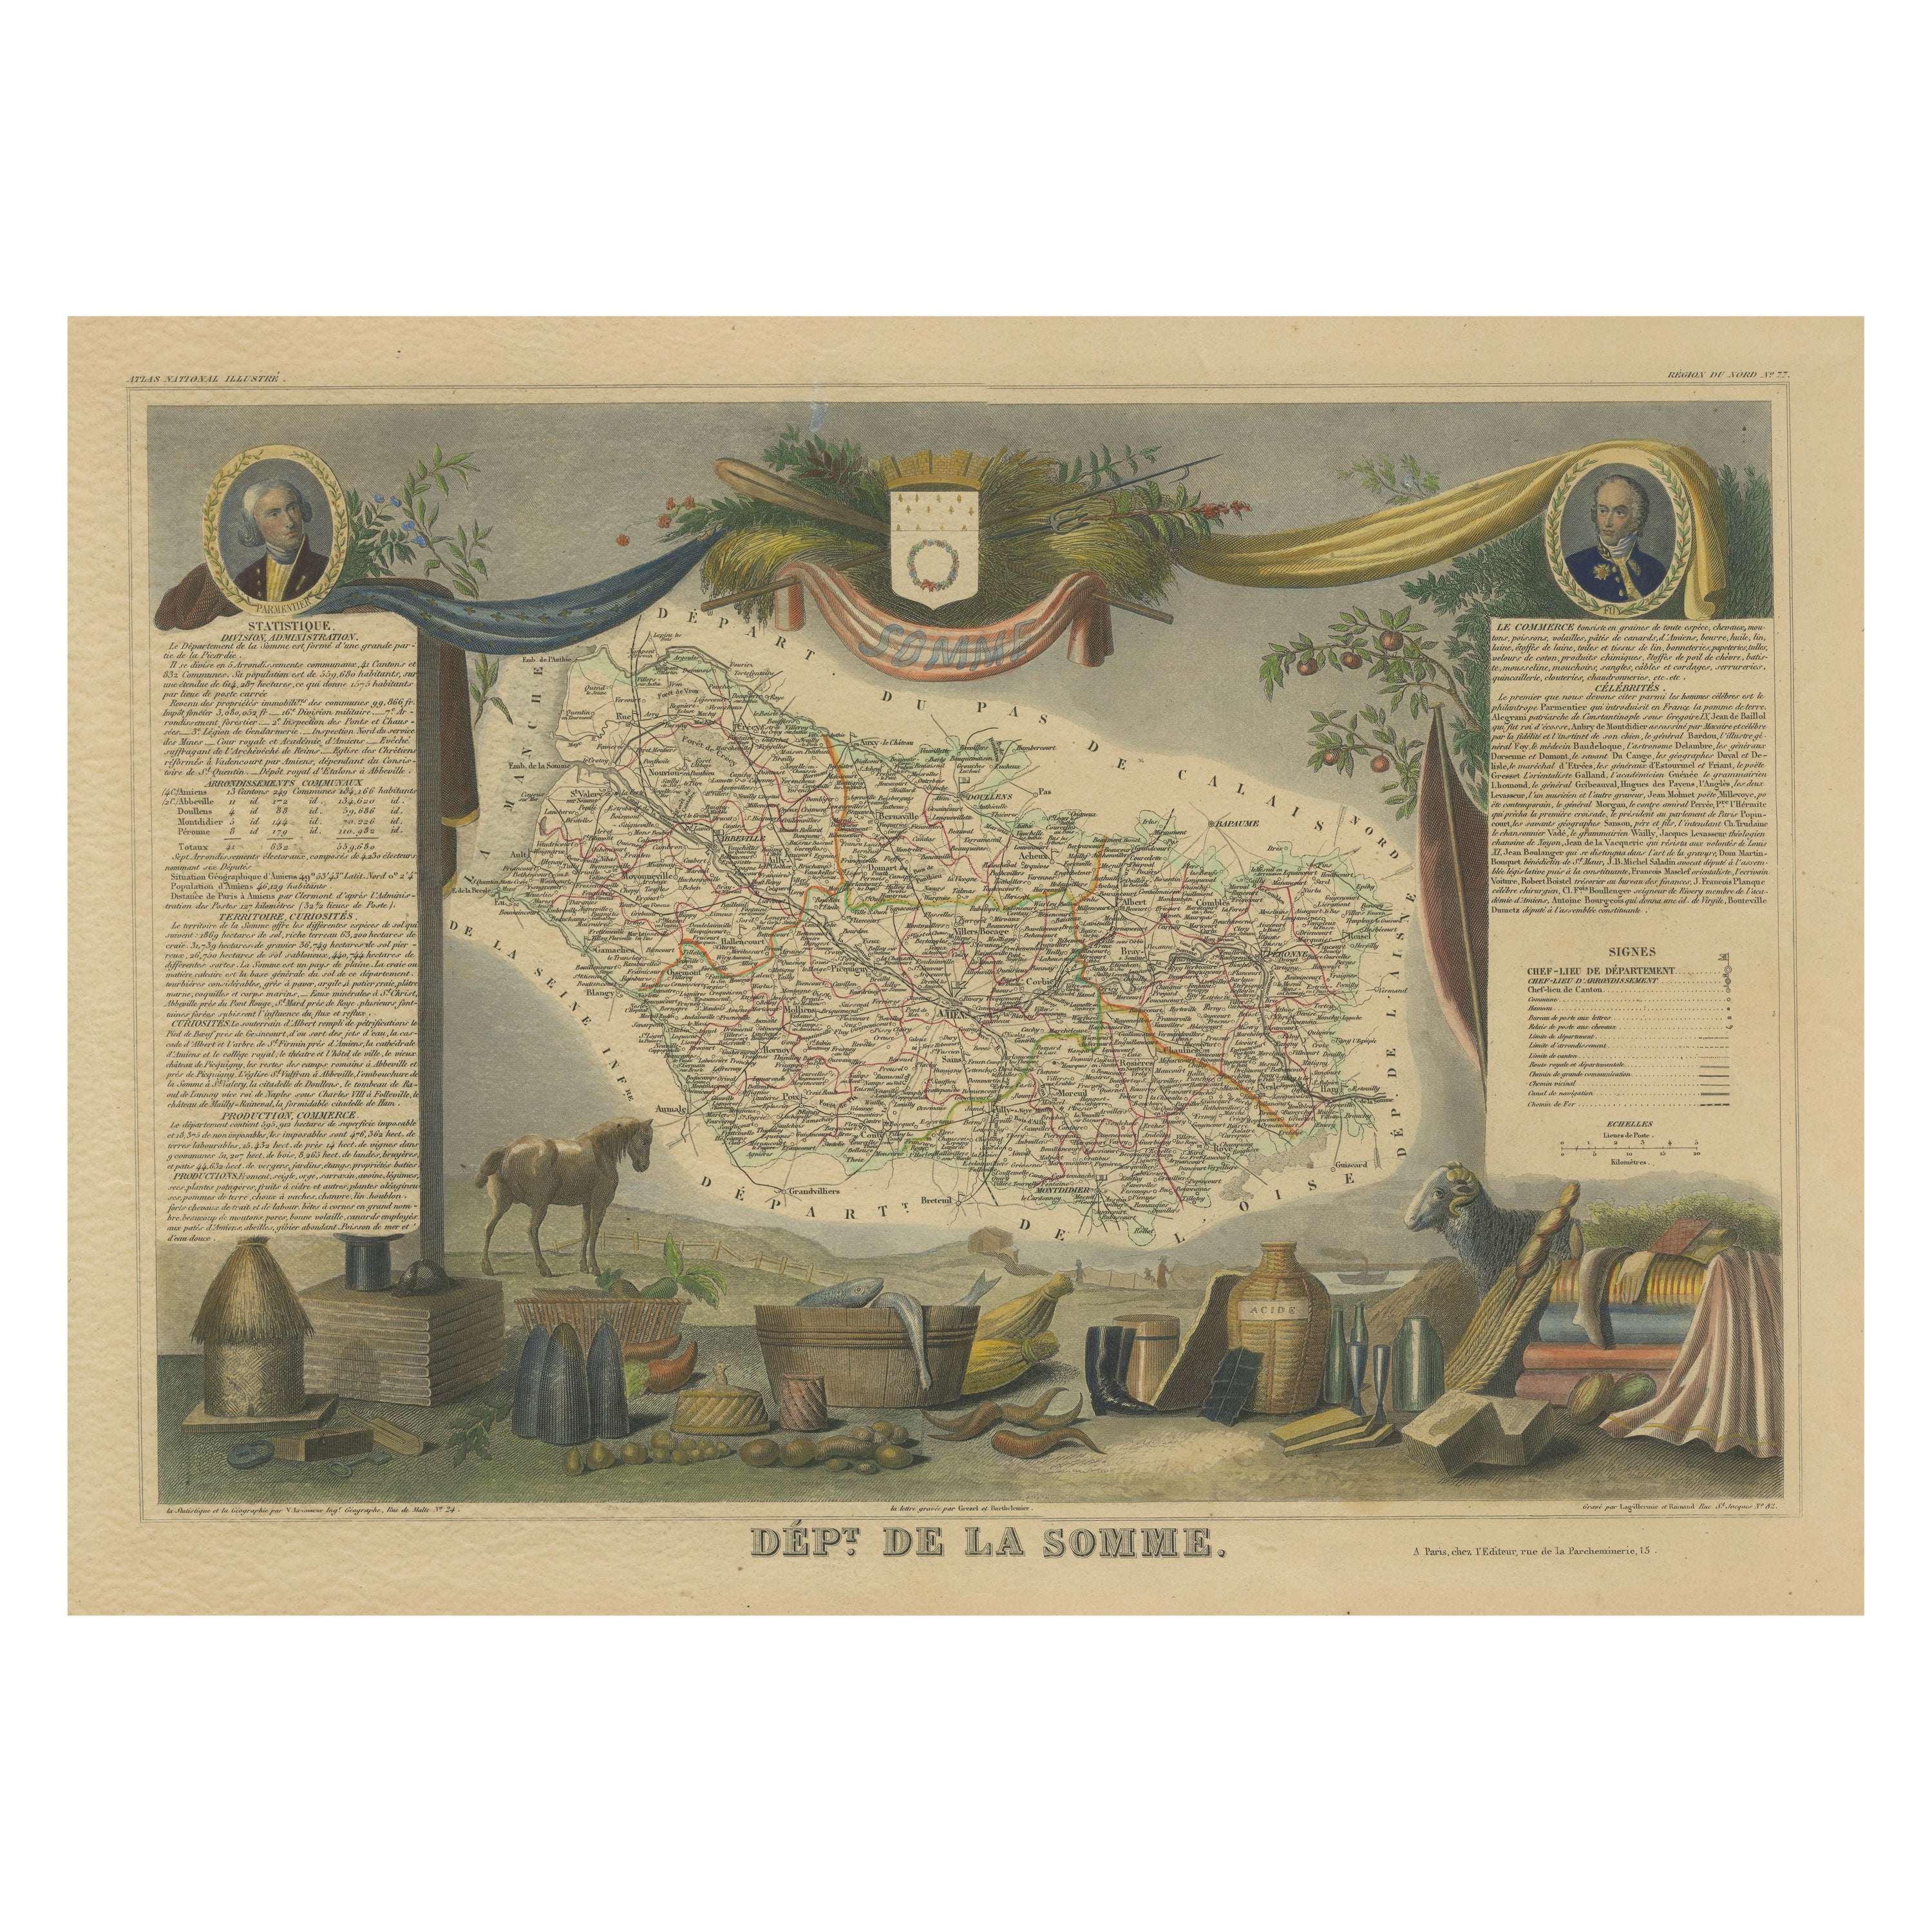 Hand Colored Antique Map of the department of Somme, France